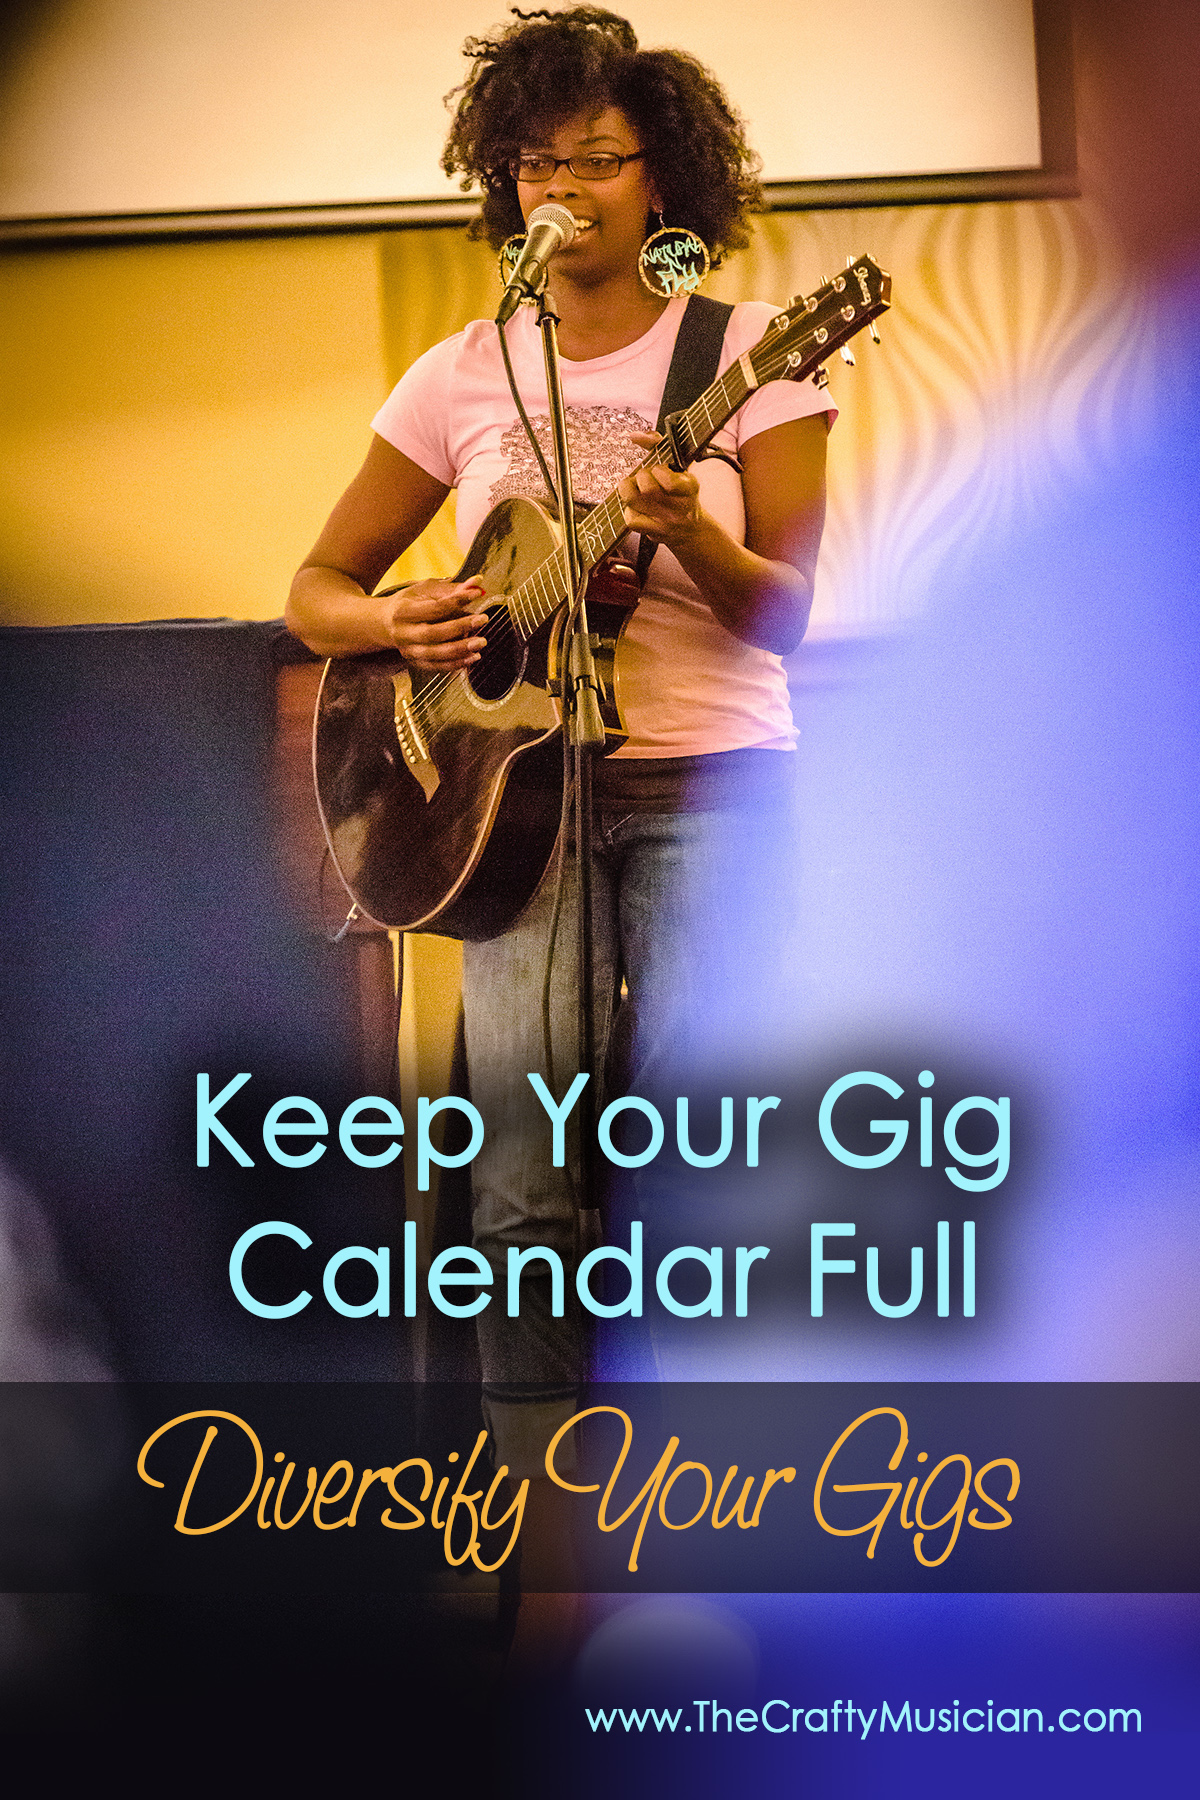 How to Keep Your Gig Calendar Full Diversify Your Gigs The Crafty